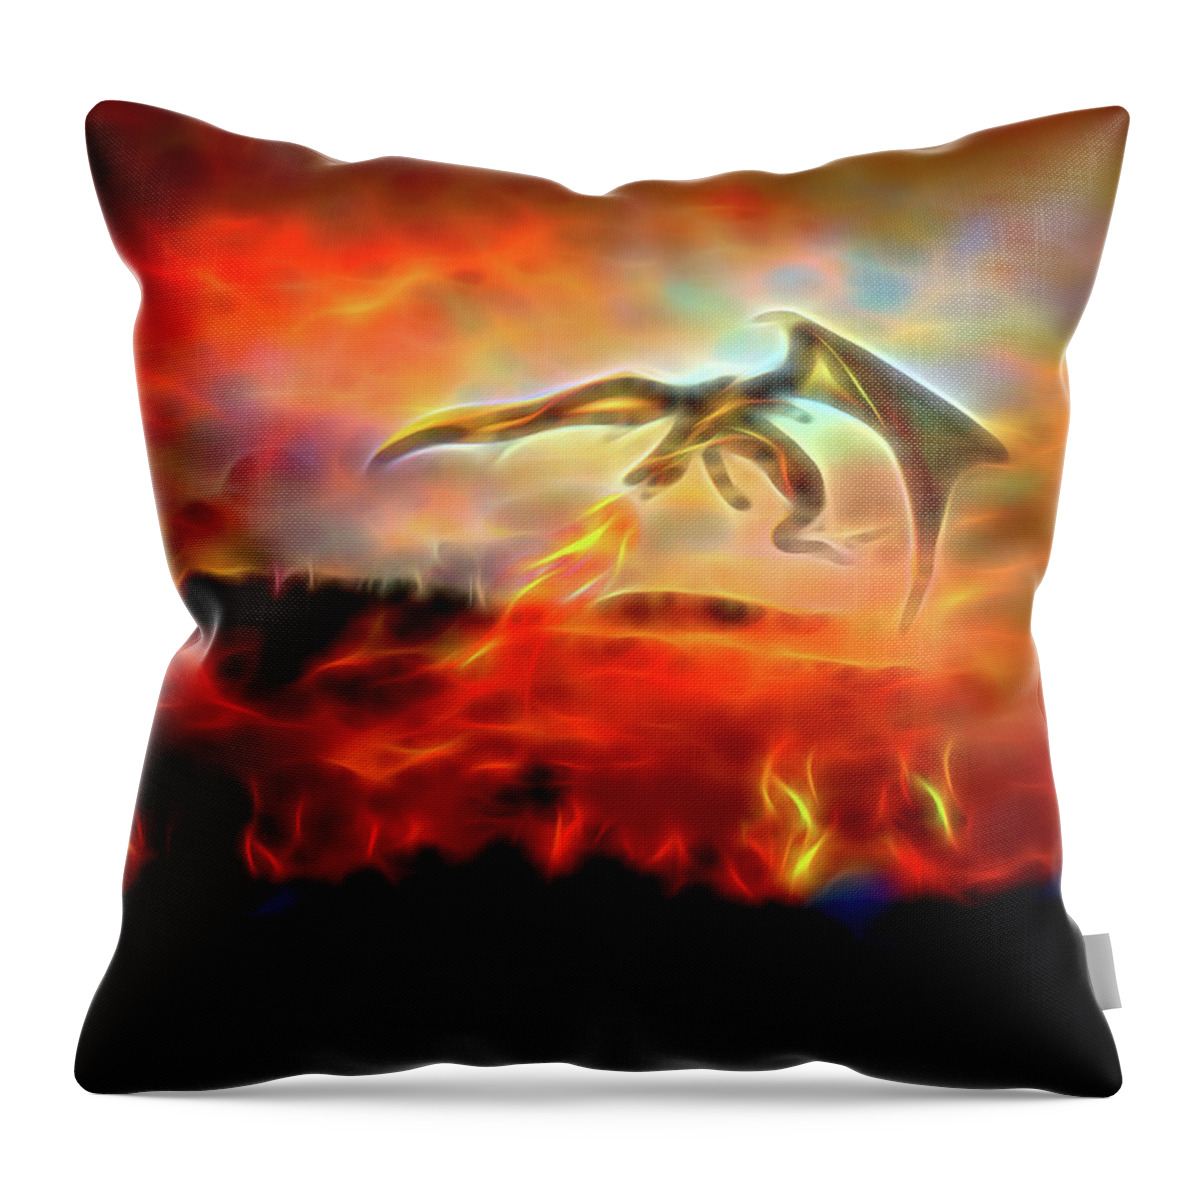 Game Of Thrones Dragons Throw Pillow featuring the digital art Burn them all by Lilia D